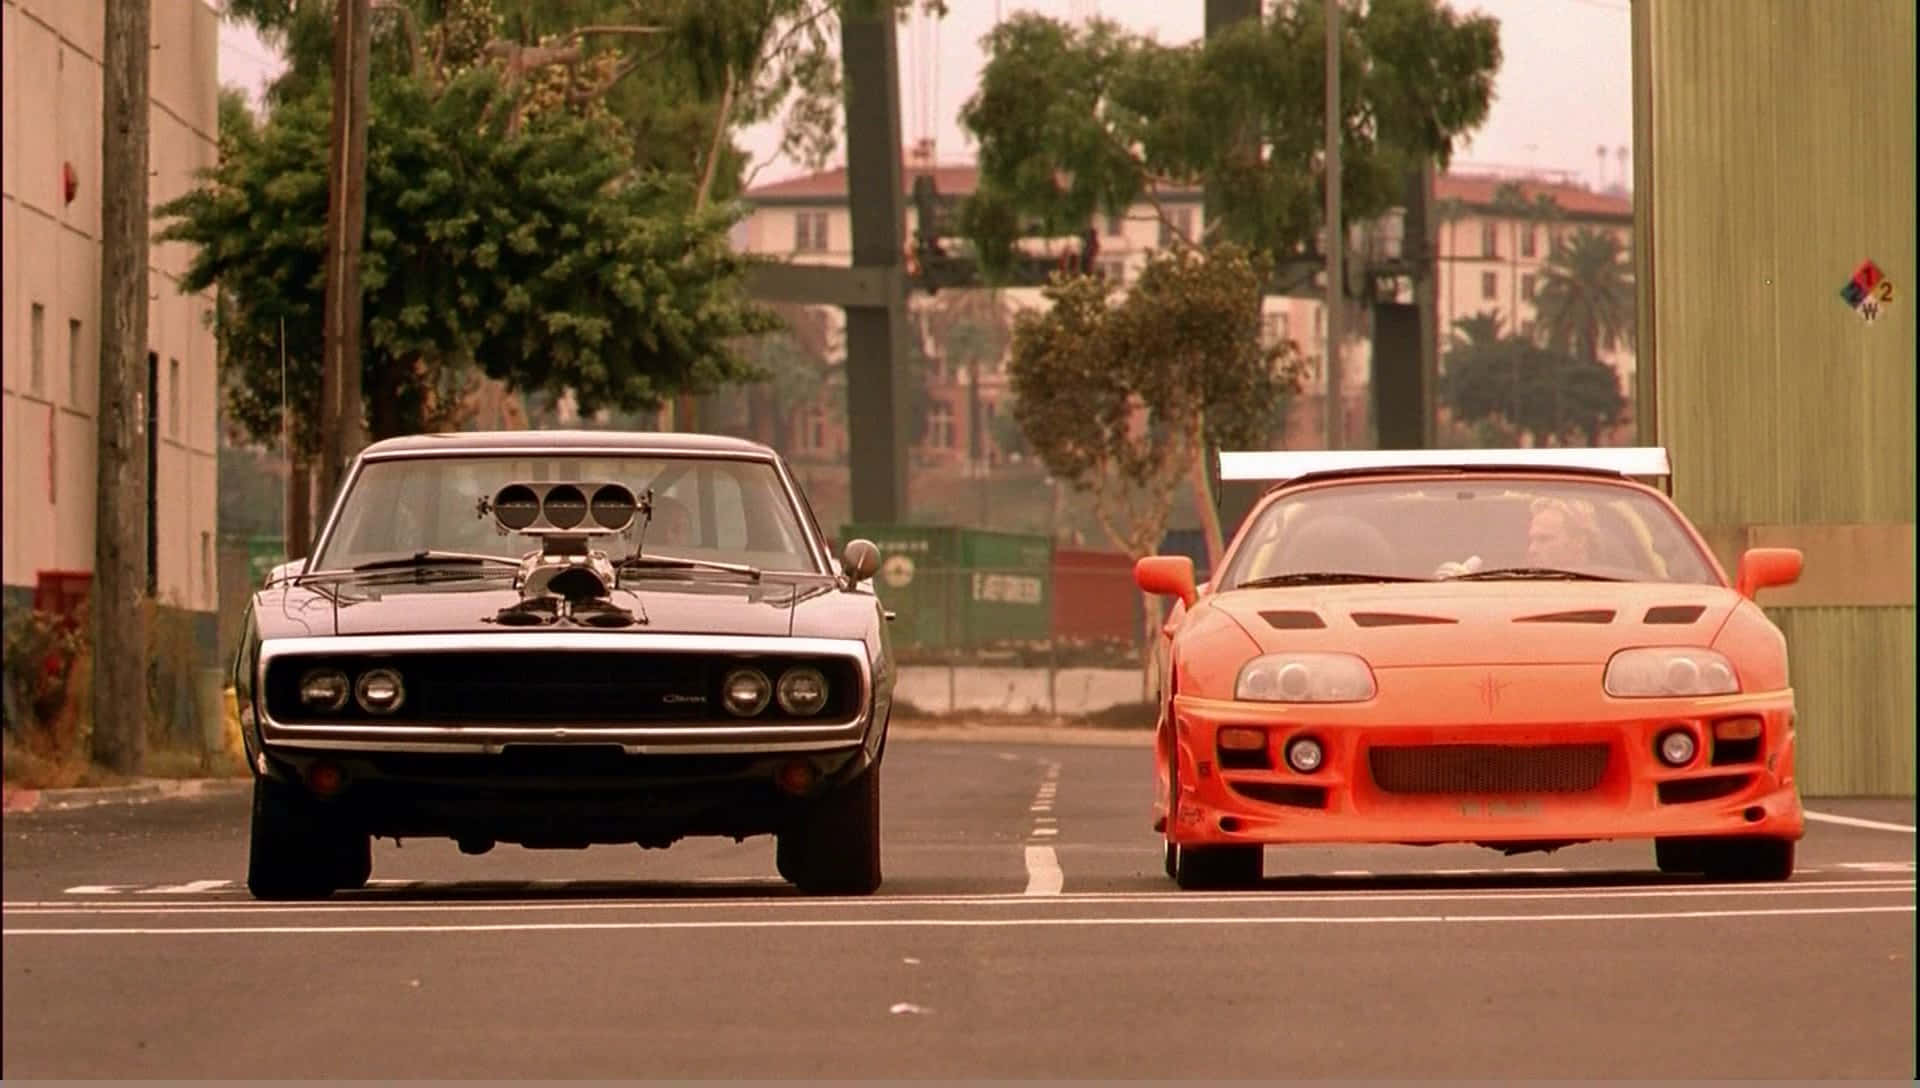 Enjoy the fast paced ride of the Hd Fast&Furious series